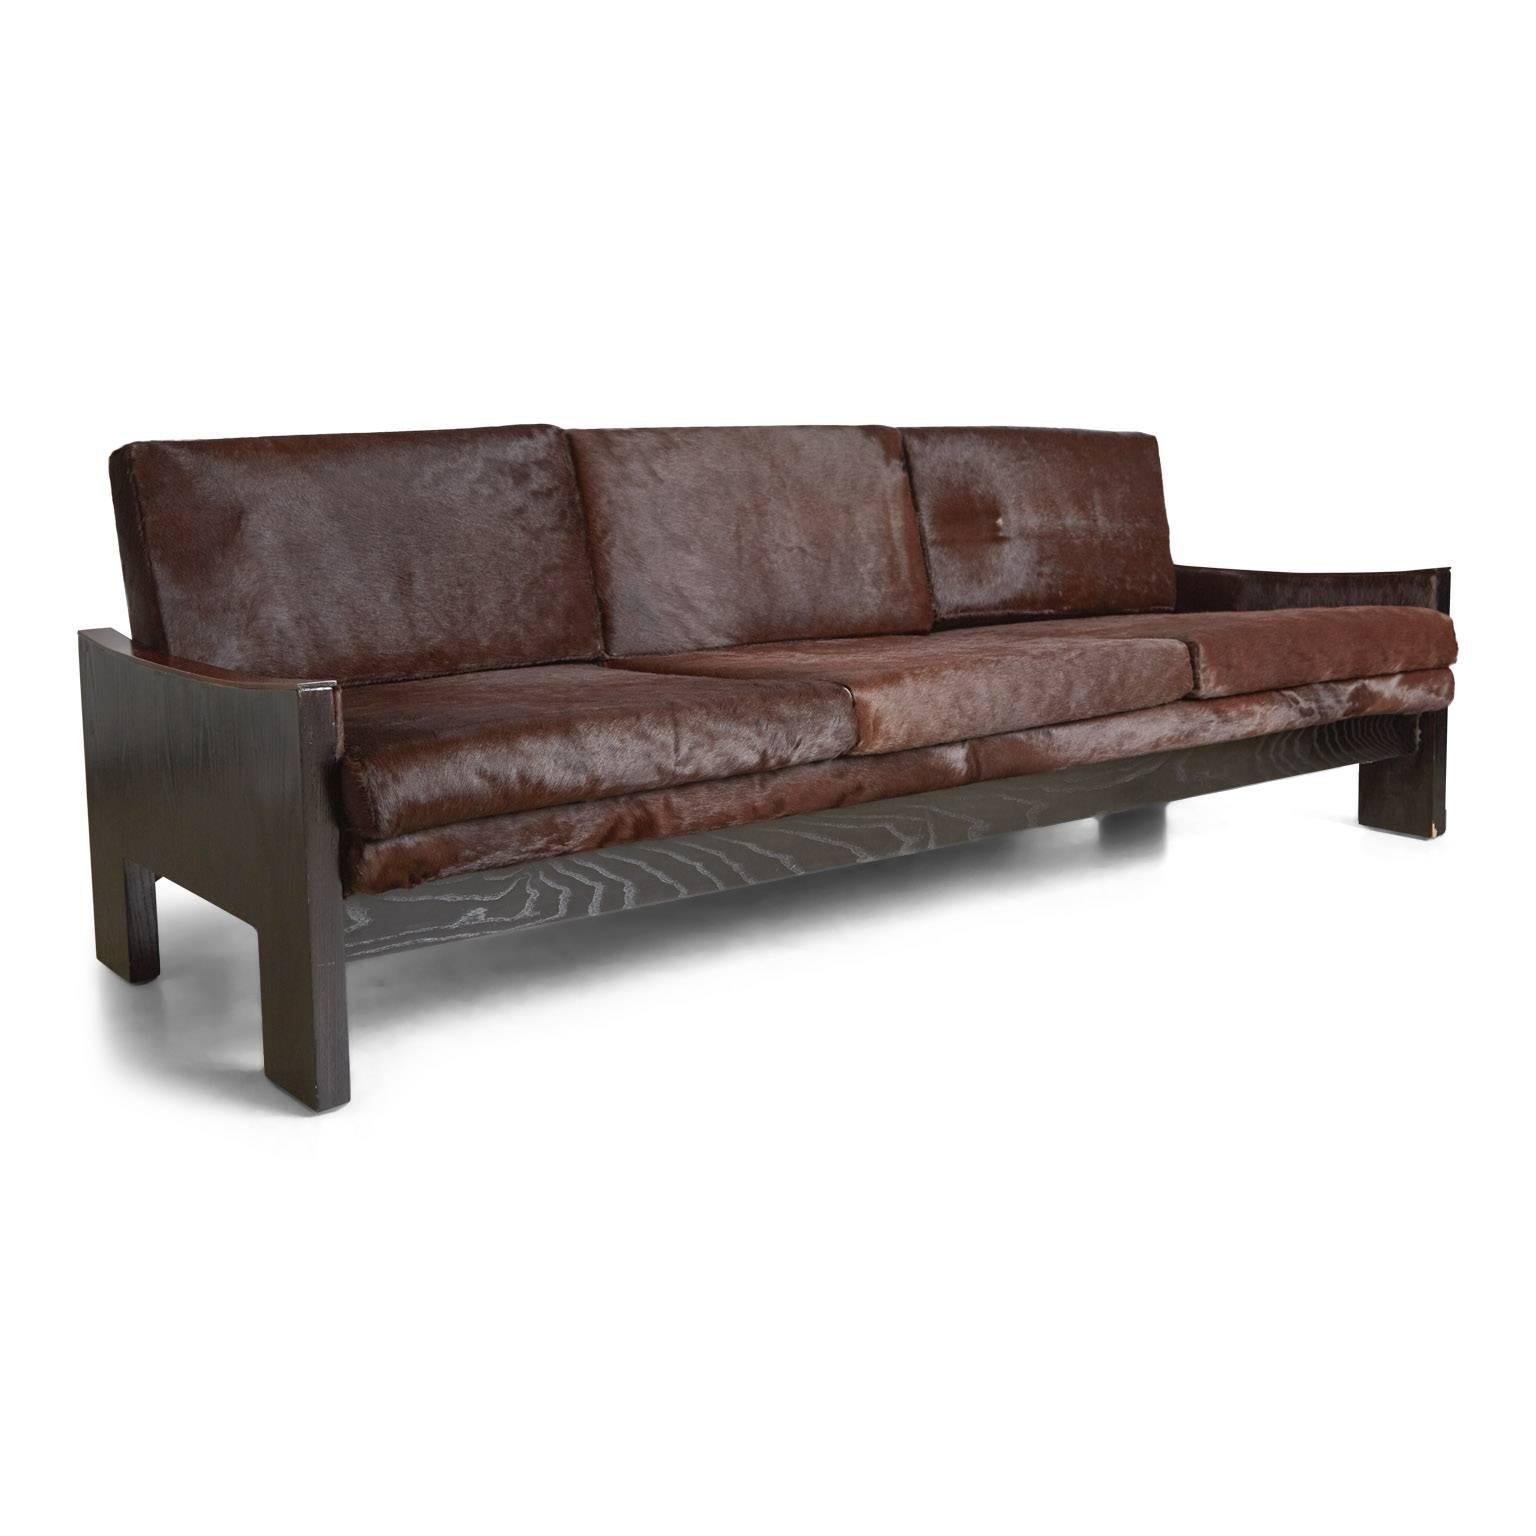 This highly detailed and exotic Brazilian sofa features glossy brown hair-on hide leather upholstery with subtle variations throughout, with ebonized oak frame and contrasting rosewood details on the armrests.

The simple, clean lines will fit